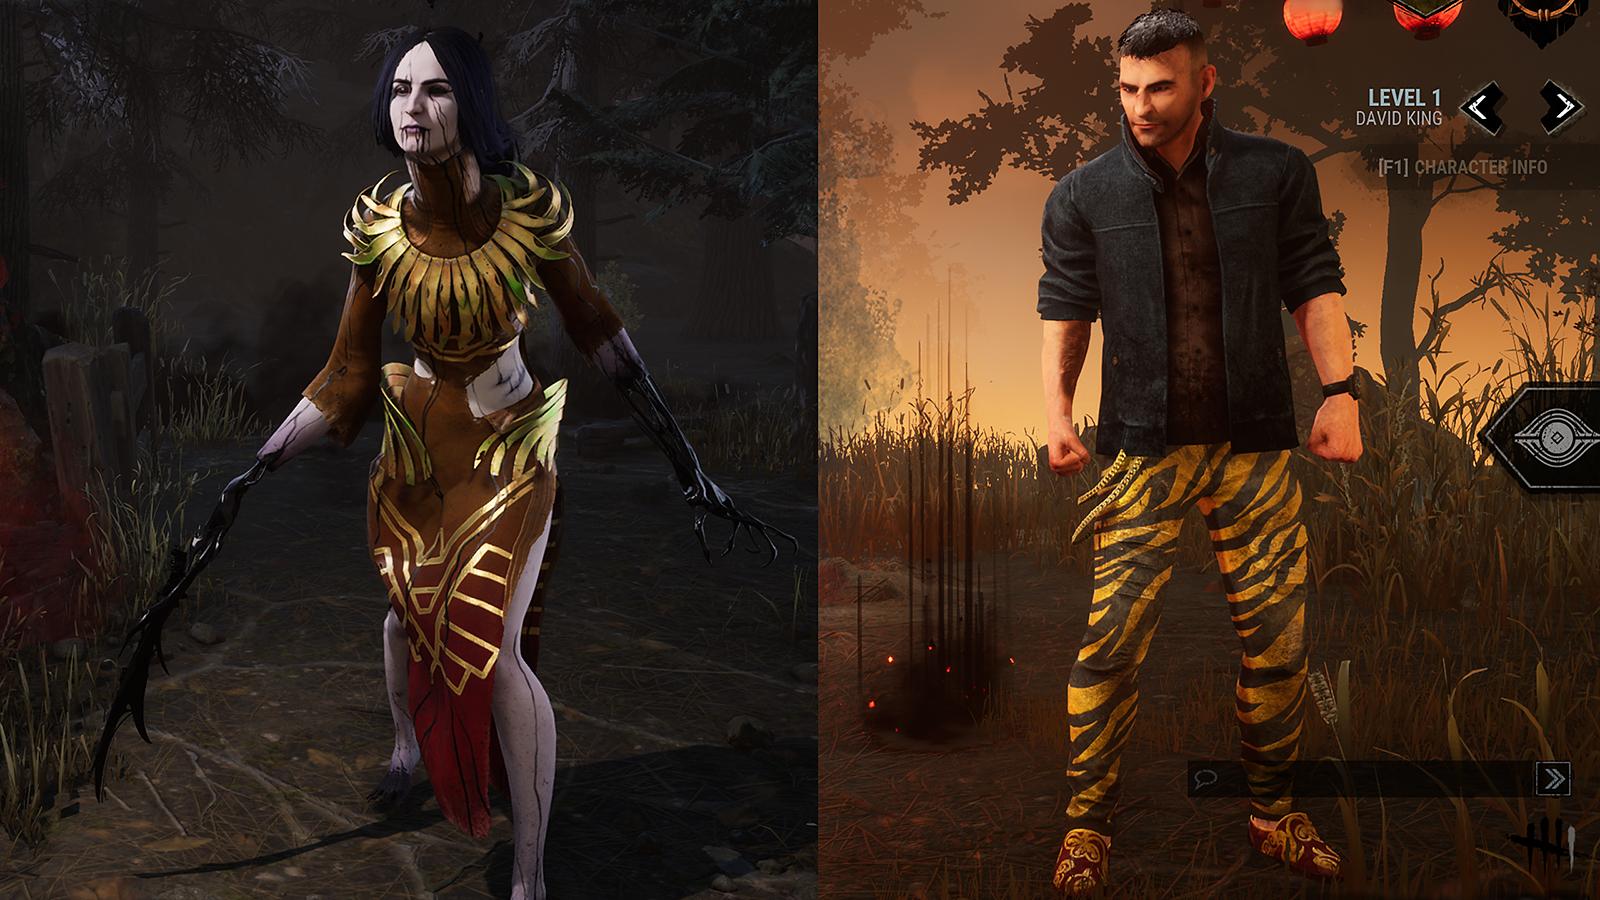 David King and The Artist's Lunar New Year cosmetics